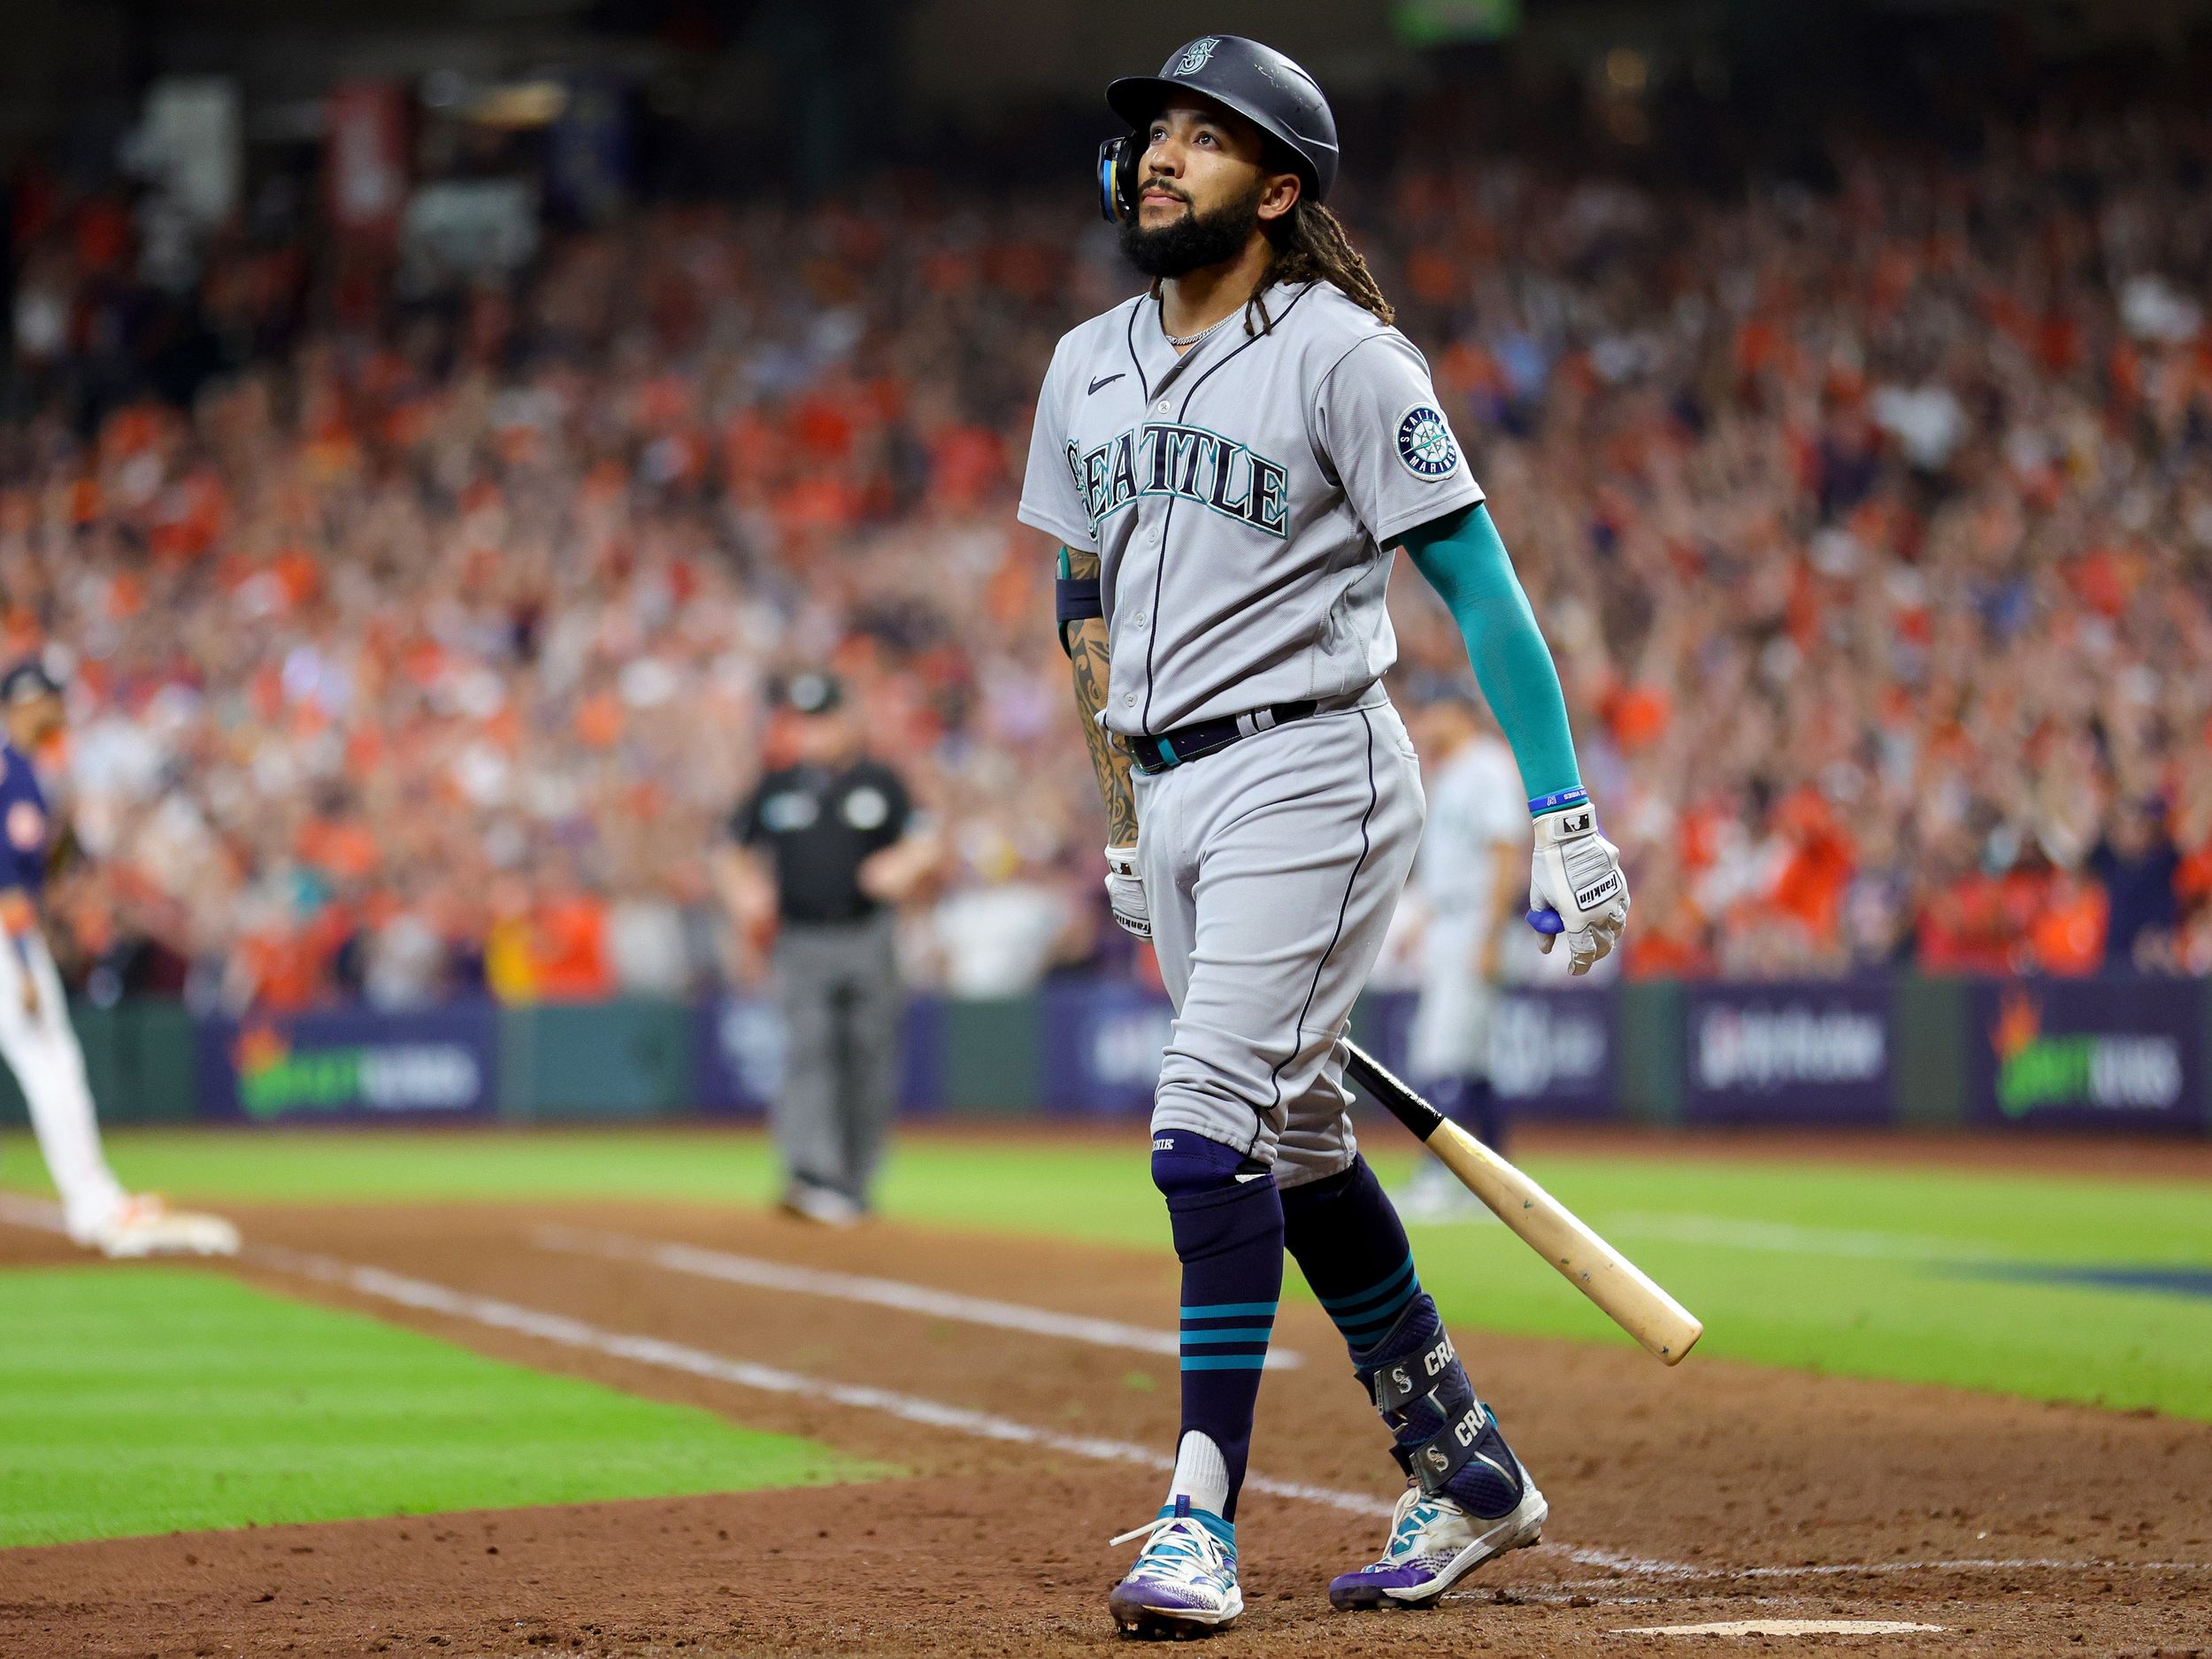 MLB Network - A big 2-run HR in Game 1 and a 3-hit performance in Game 2 💪  What a showing from the Seattle Mariners catcher in the Wild Card Series.